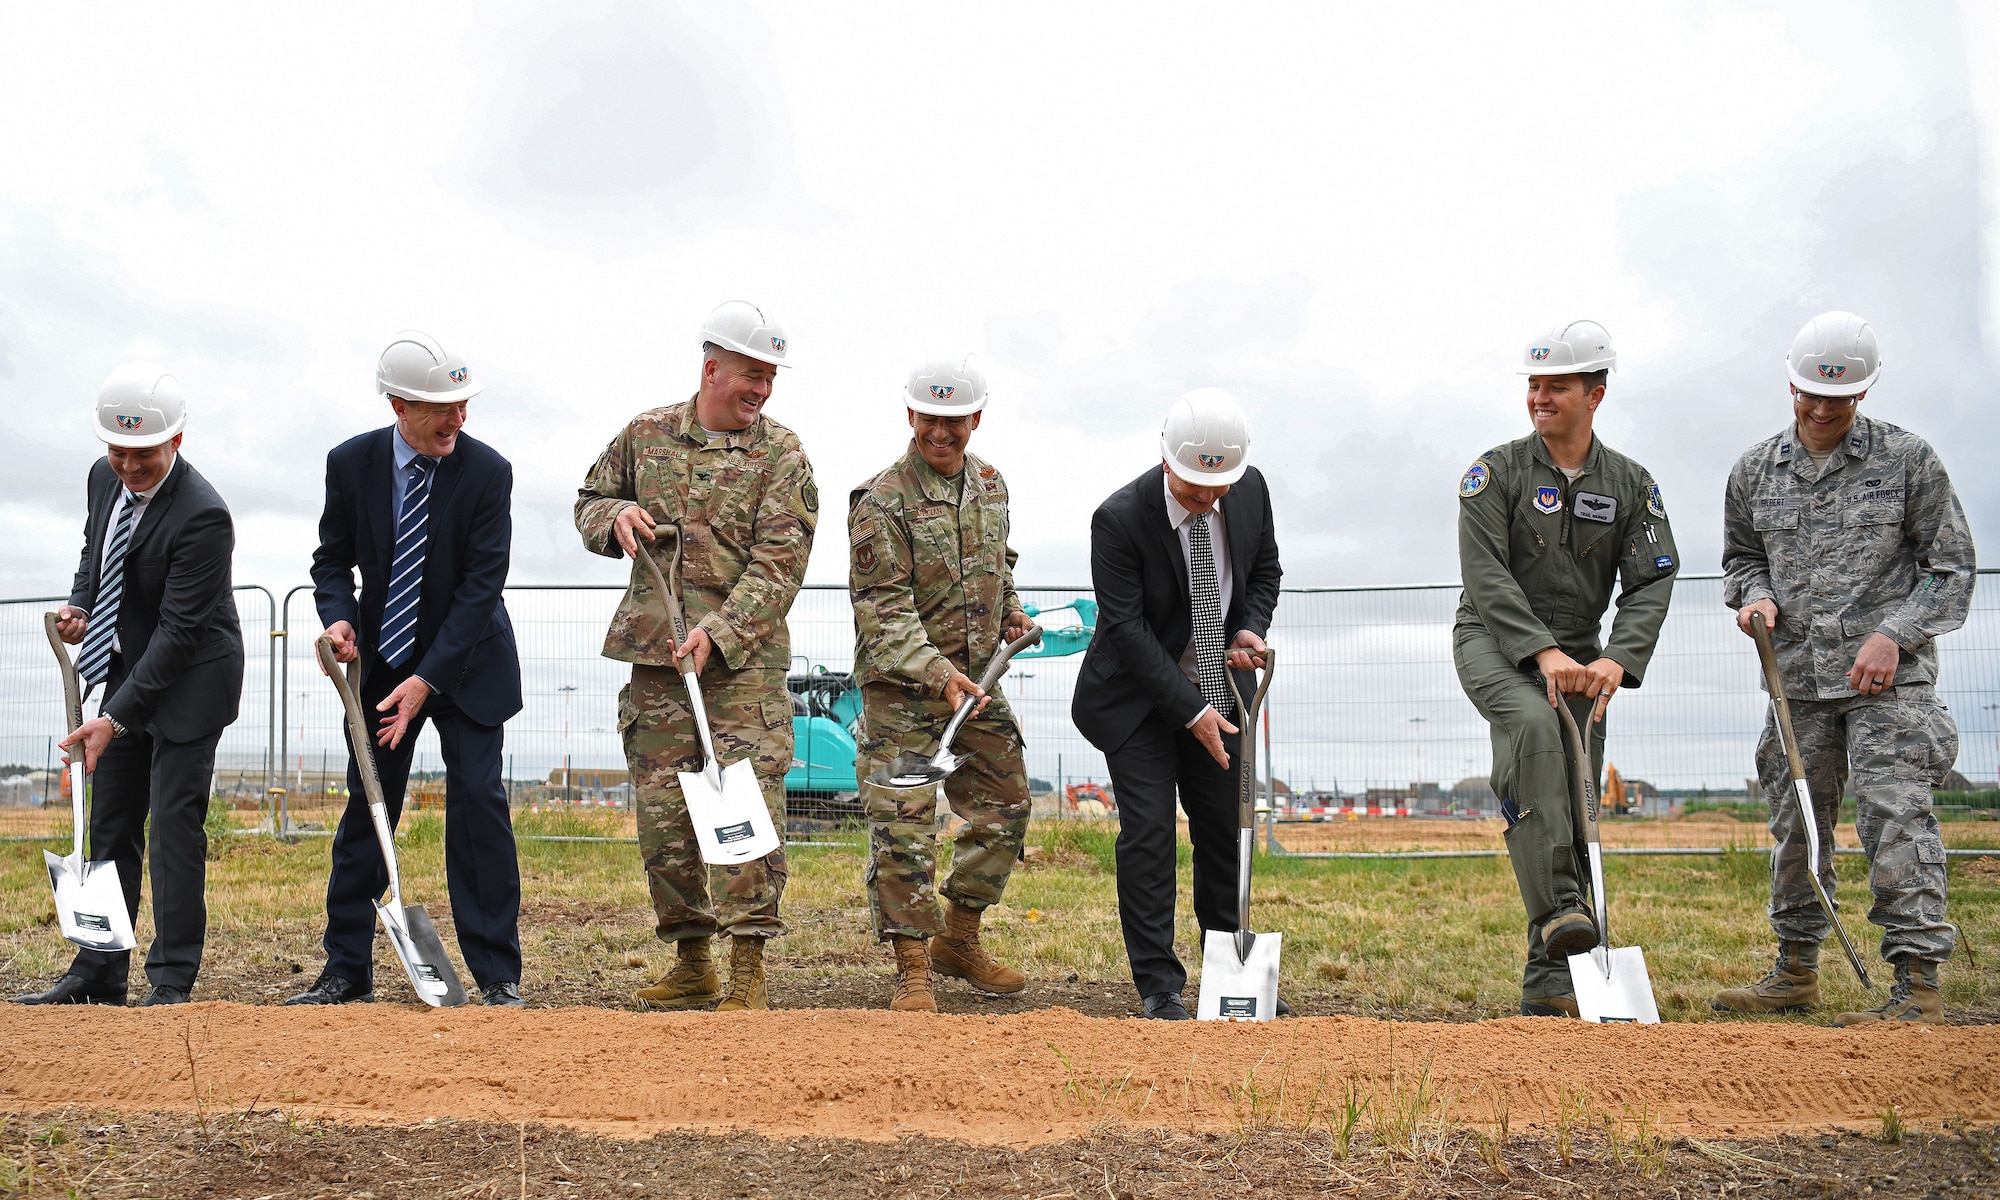 Gen. Jeffrey L. Harrigian, U.S. Air Forces in Europe and Air Forces Africa commander, (center), poses for a photo with 48th Fighter Wing personnel and local civic leaders, partners and contractors during an F-35 Lightning II groundbreaking ceremony at RAF Lakenheath, U.K., July 15, 2019. The groundbreaking follows the ongoing construction projects that will facilitate two F-35A squadrons, making RAF Lakenheath the first permanent international site for U.S. fifth generation aircraft in Europe. (U.S. Air Force photo by Airman 1st Class Shanice Williams-Jones)